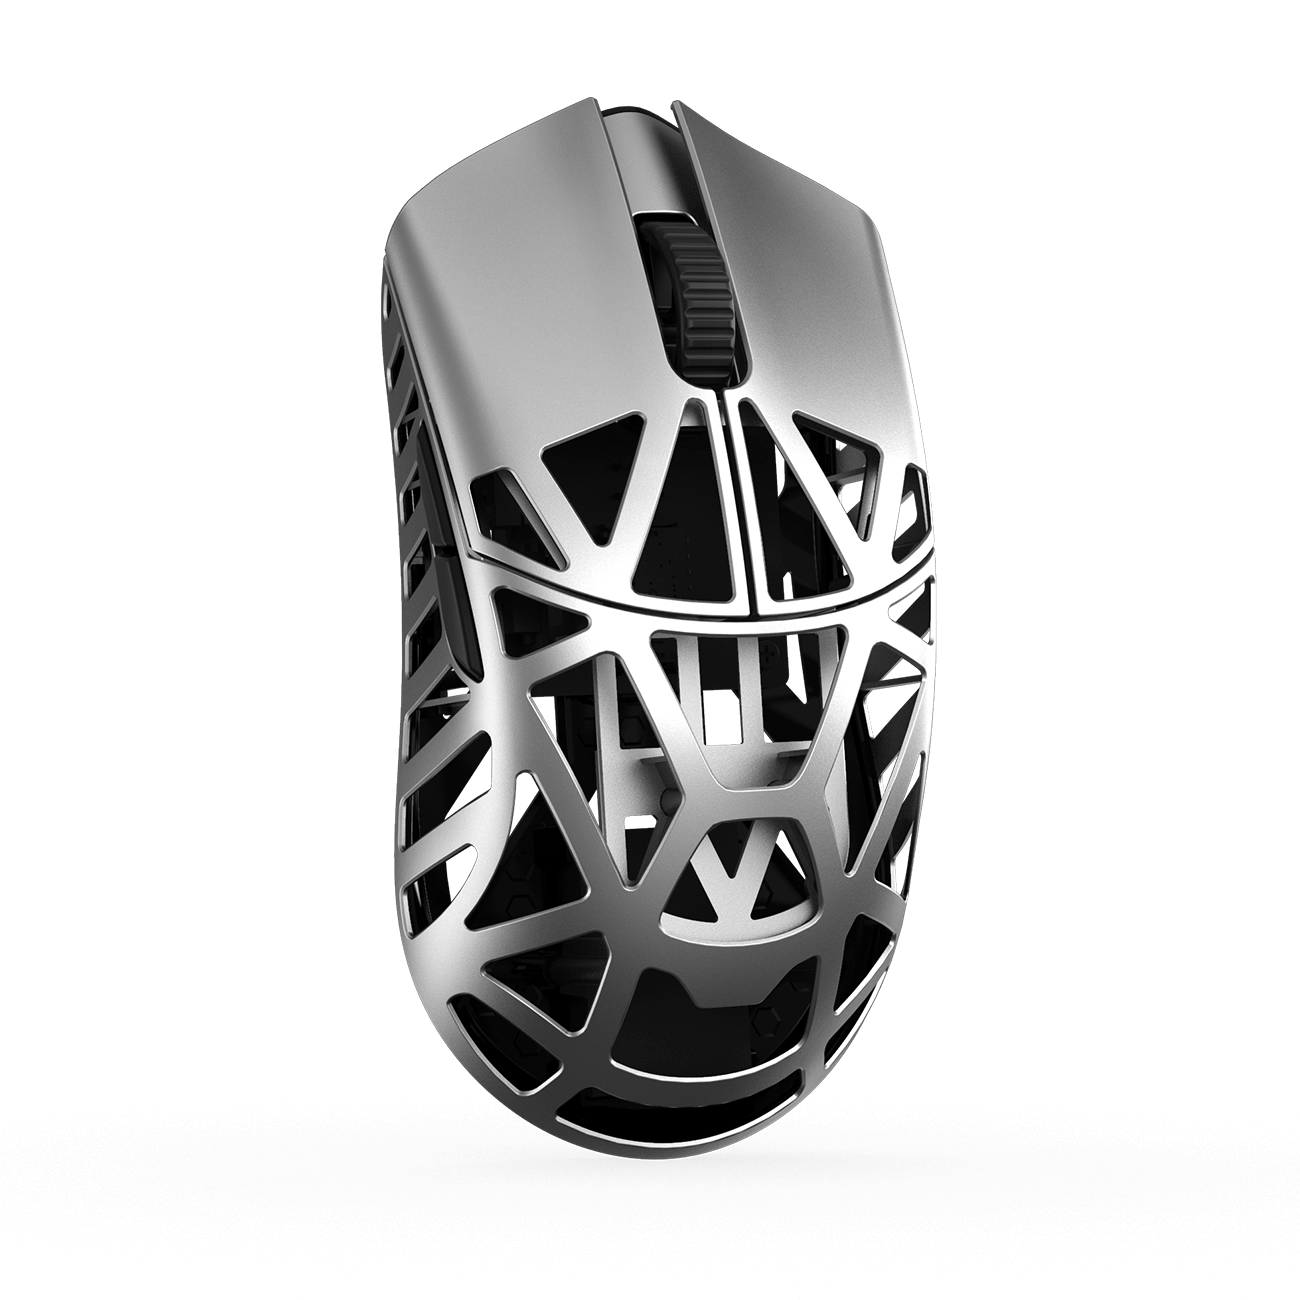 BEAST X Wireless Gaming Mouse